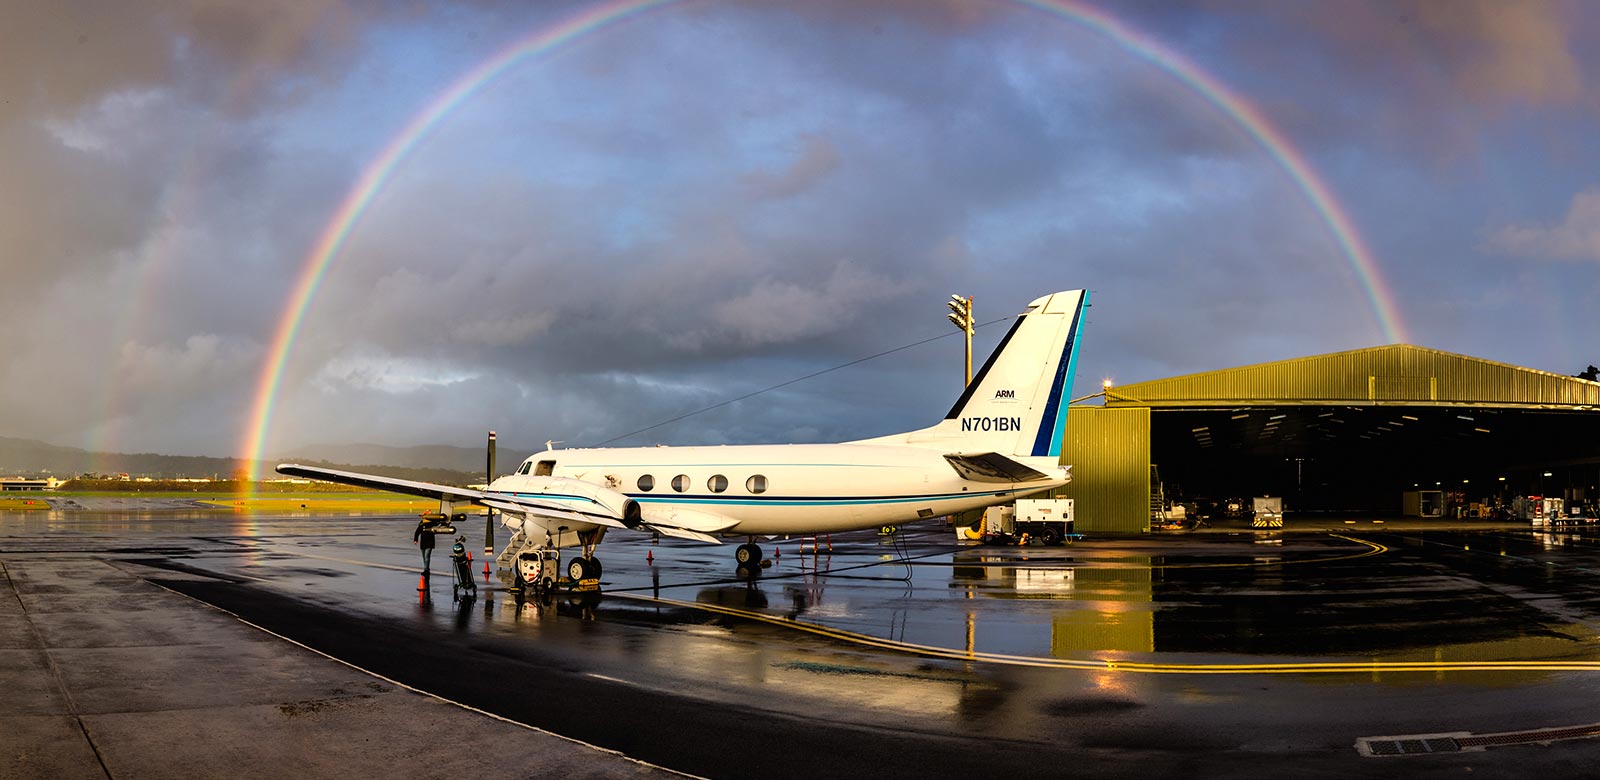 photo of Gulfstream-159 (G-1) research aircraft